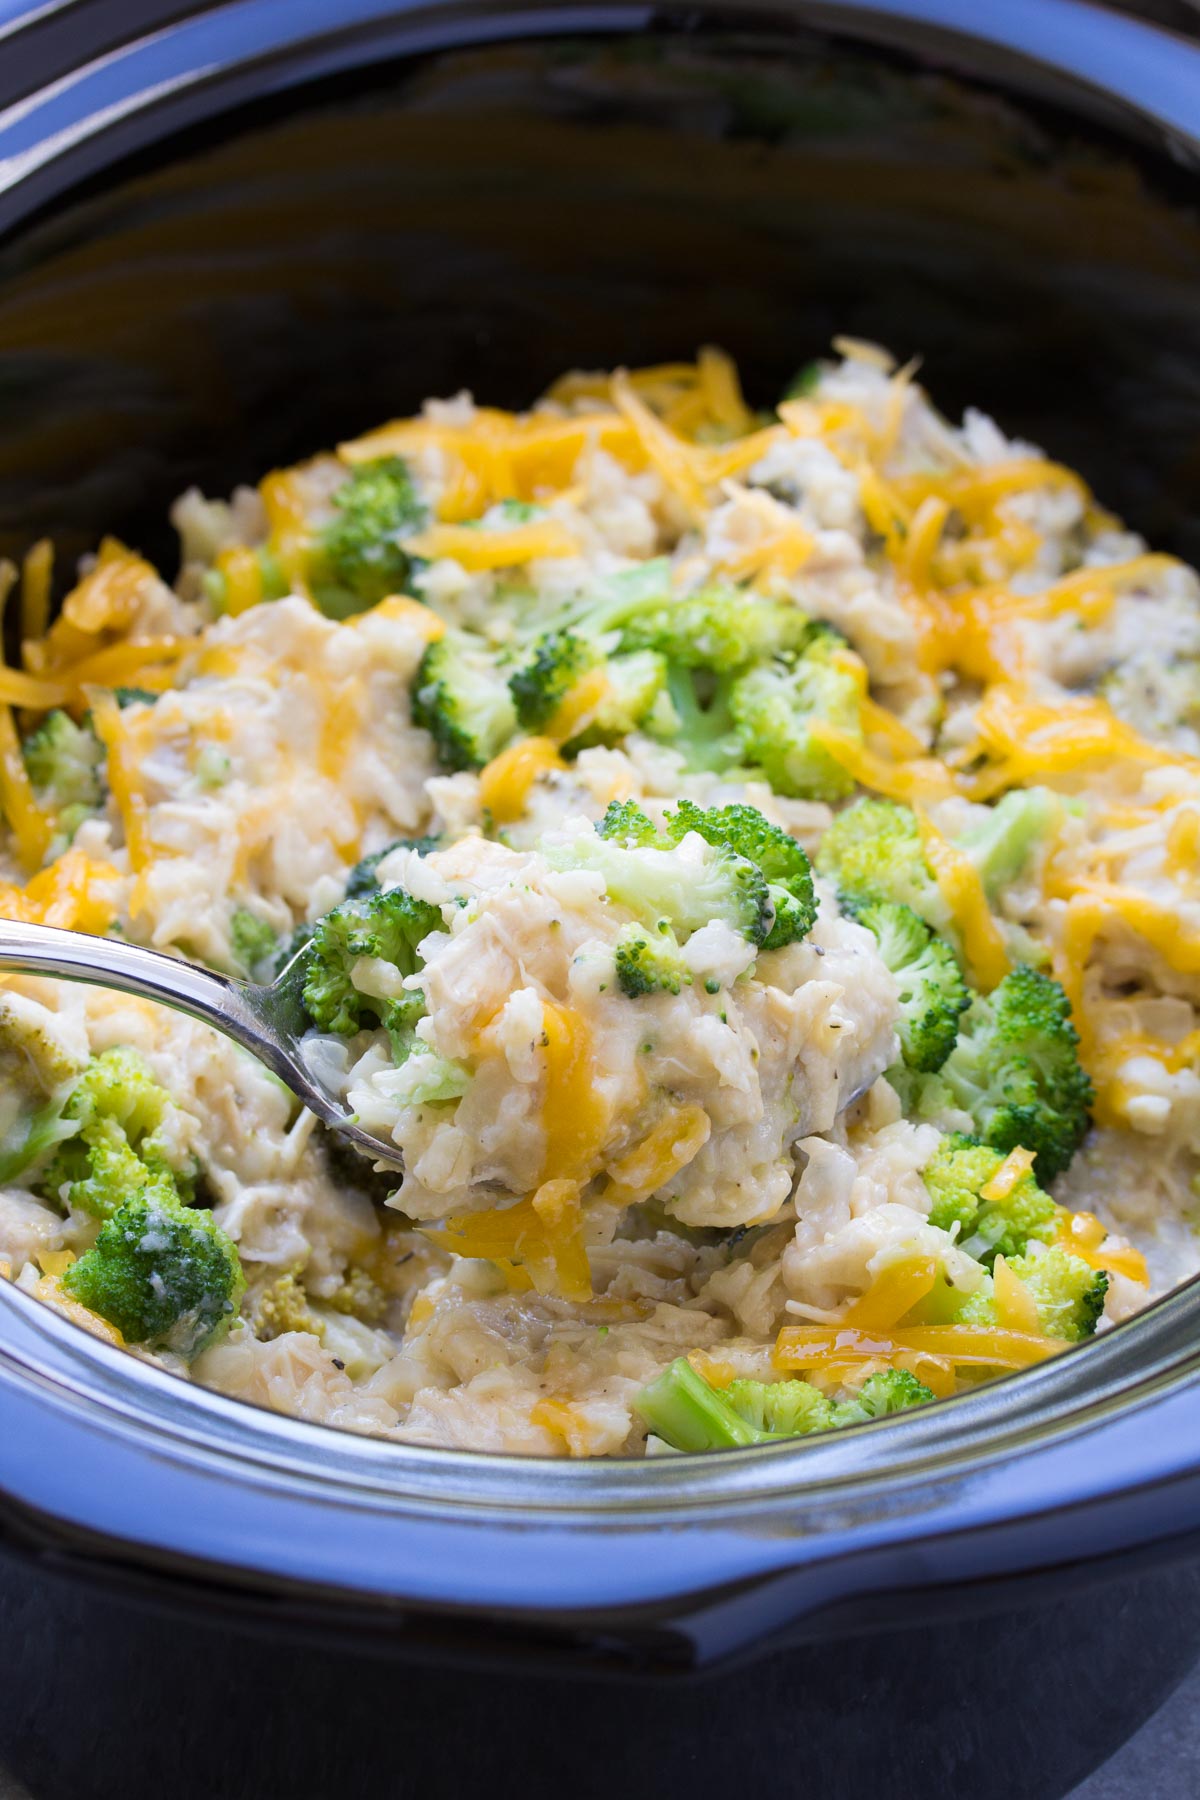 Slow Cooker Chicken Broccoli And Rice Casserole,Portable Gas Grills On Sale